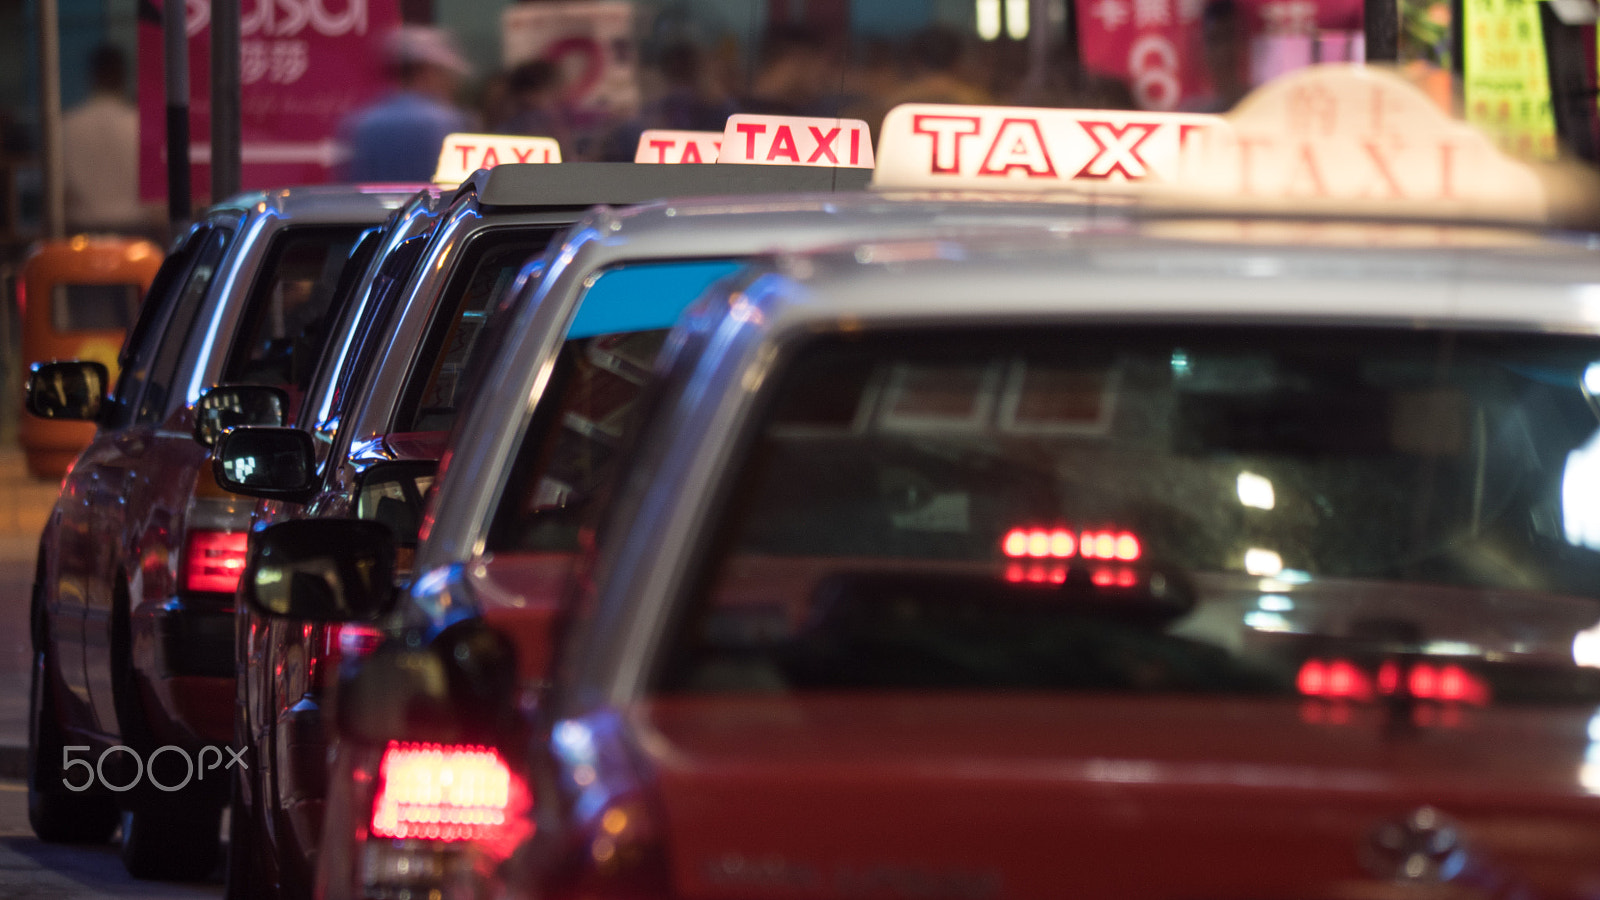 Panasonic Lumix DMC-GH4 sample photo. Taxi cars parked in row at night photography